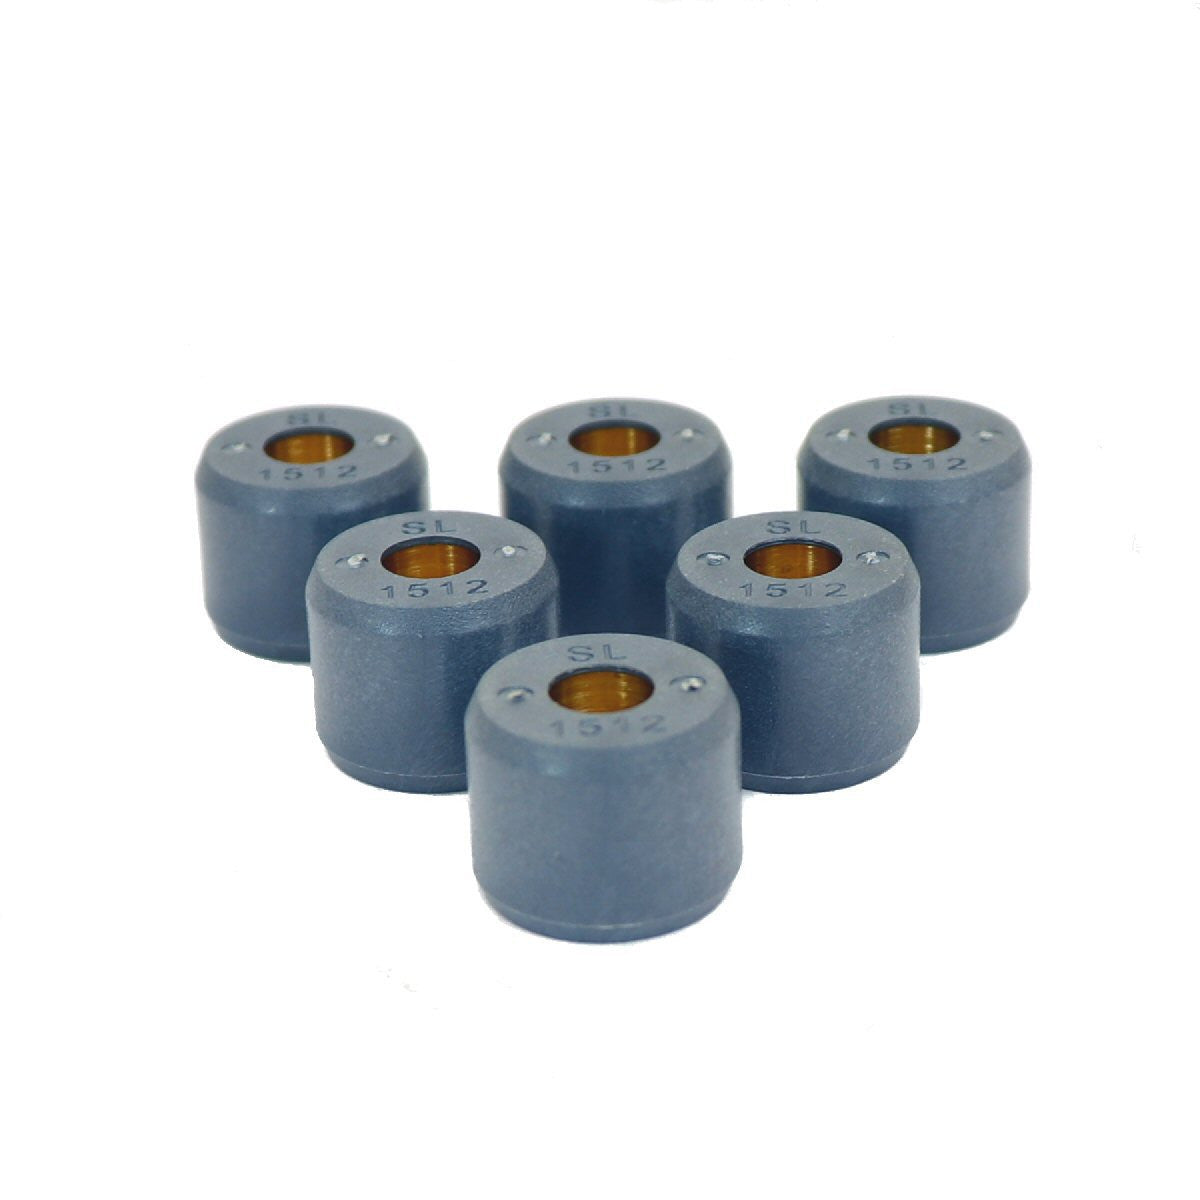 16x13 6.5g Rollers by Dr. Pulley